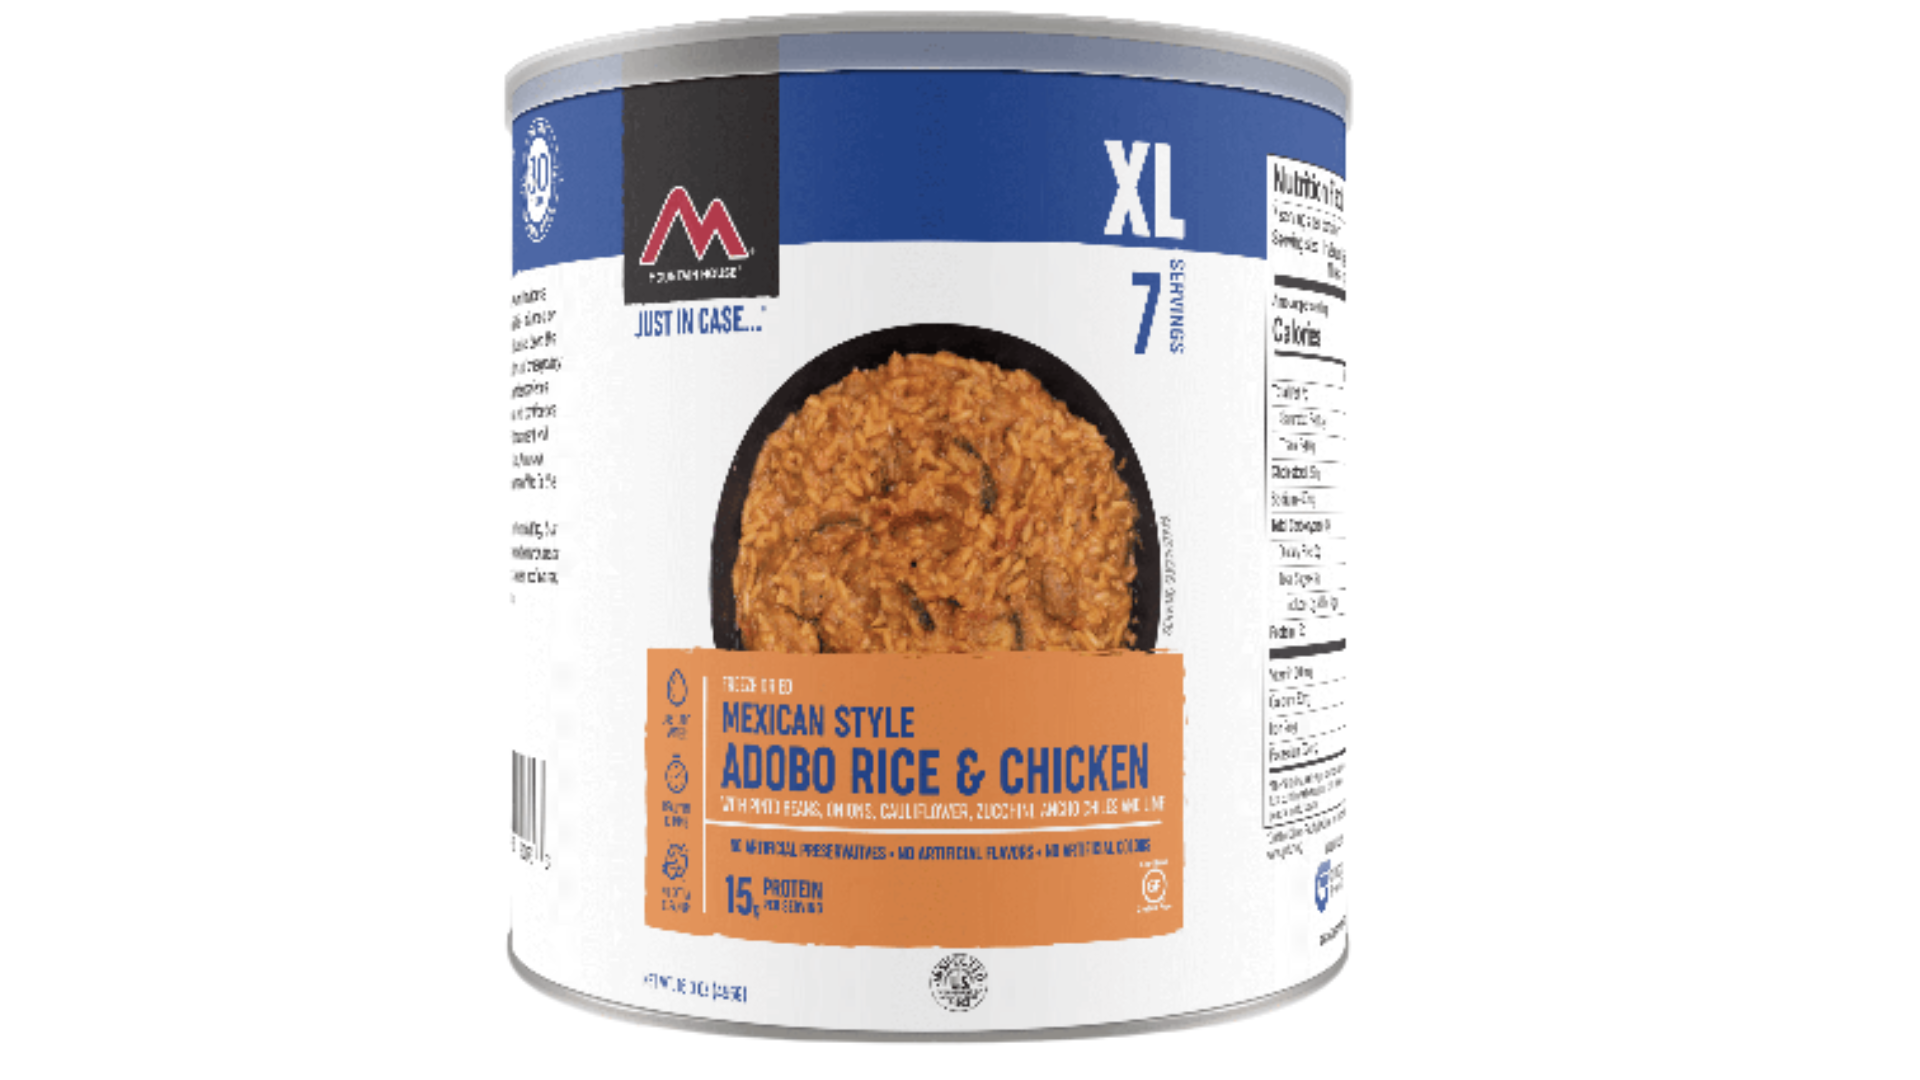 Mexican Adobe rice & chicken (01 Can) XL - 7 Servings